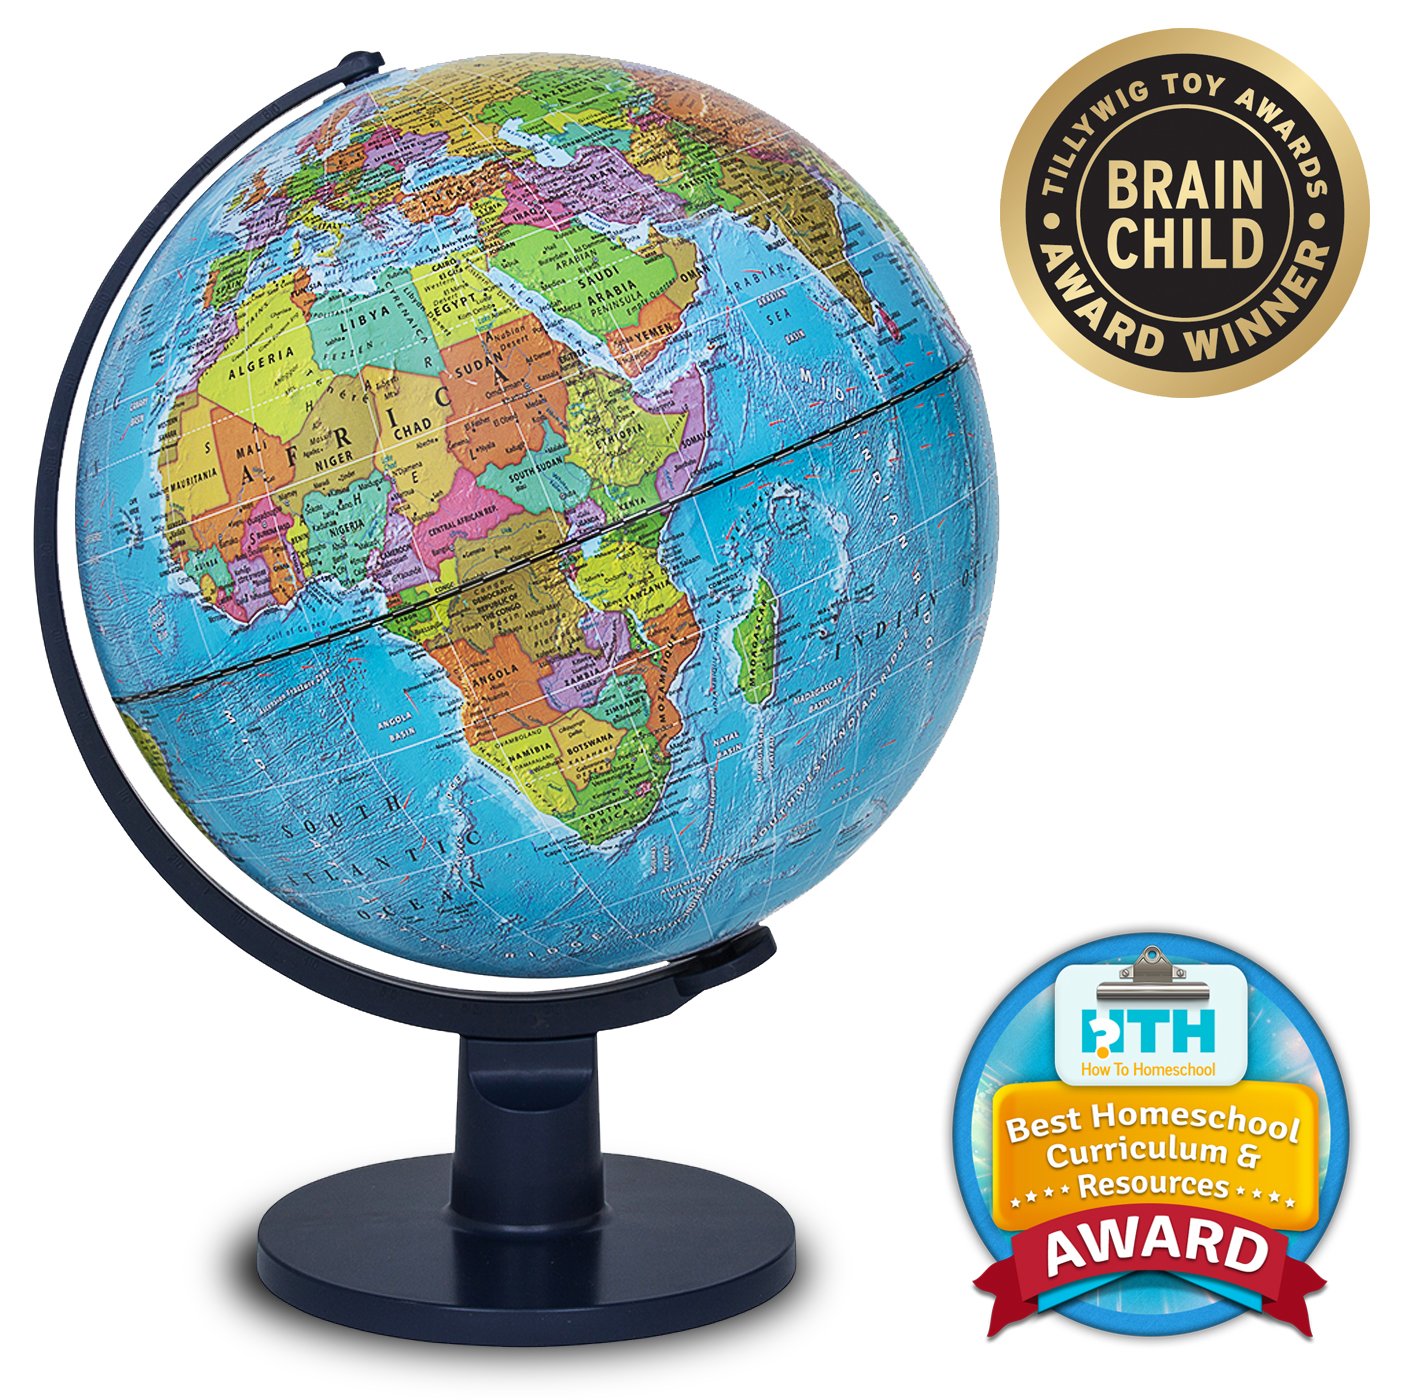 Waypoint Geographic World Globe for Kids - Scout 12” Desk Classroom Decorative Globe with Stand, More Than 4000 Names & Placesup to Date World Globe